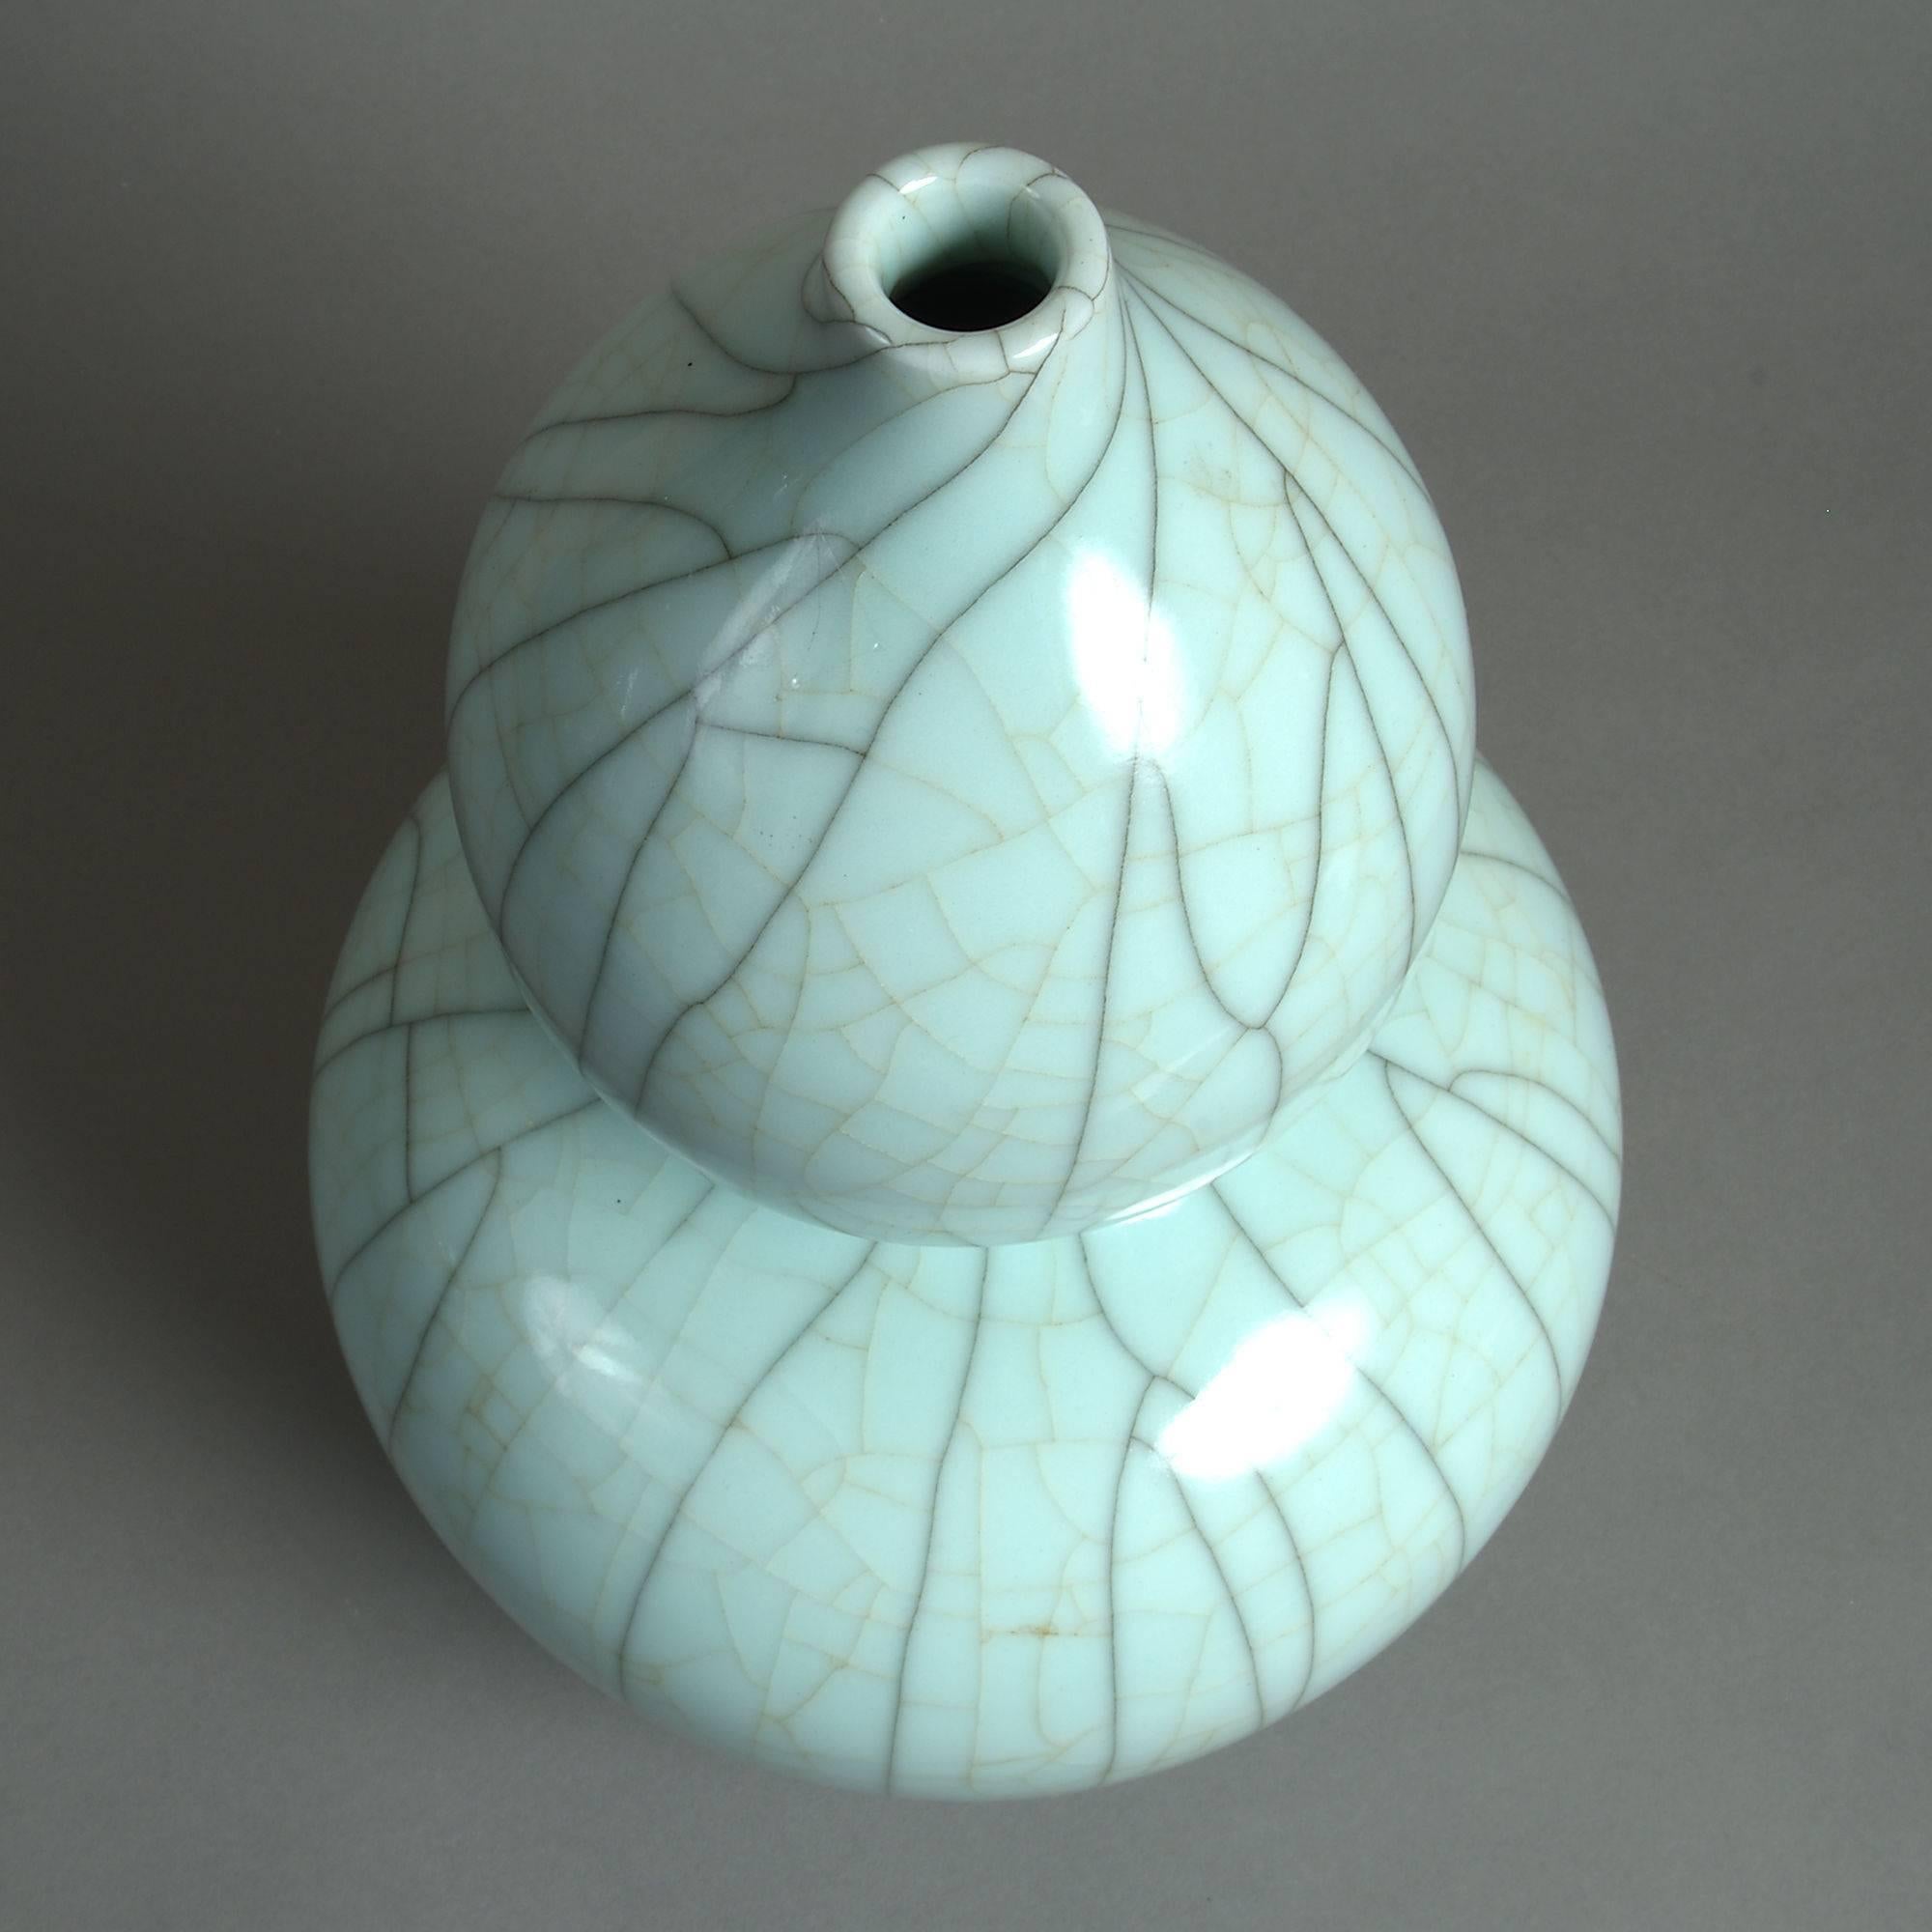 A 19th century celadon crackle glazed porcelain gourd vase of good scale. 

This vase employs a delightfully pale shade of celadon glaze. The cracquelle surface is especially pleasing as it exists in two shades: jet black lines over much faint and